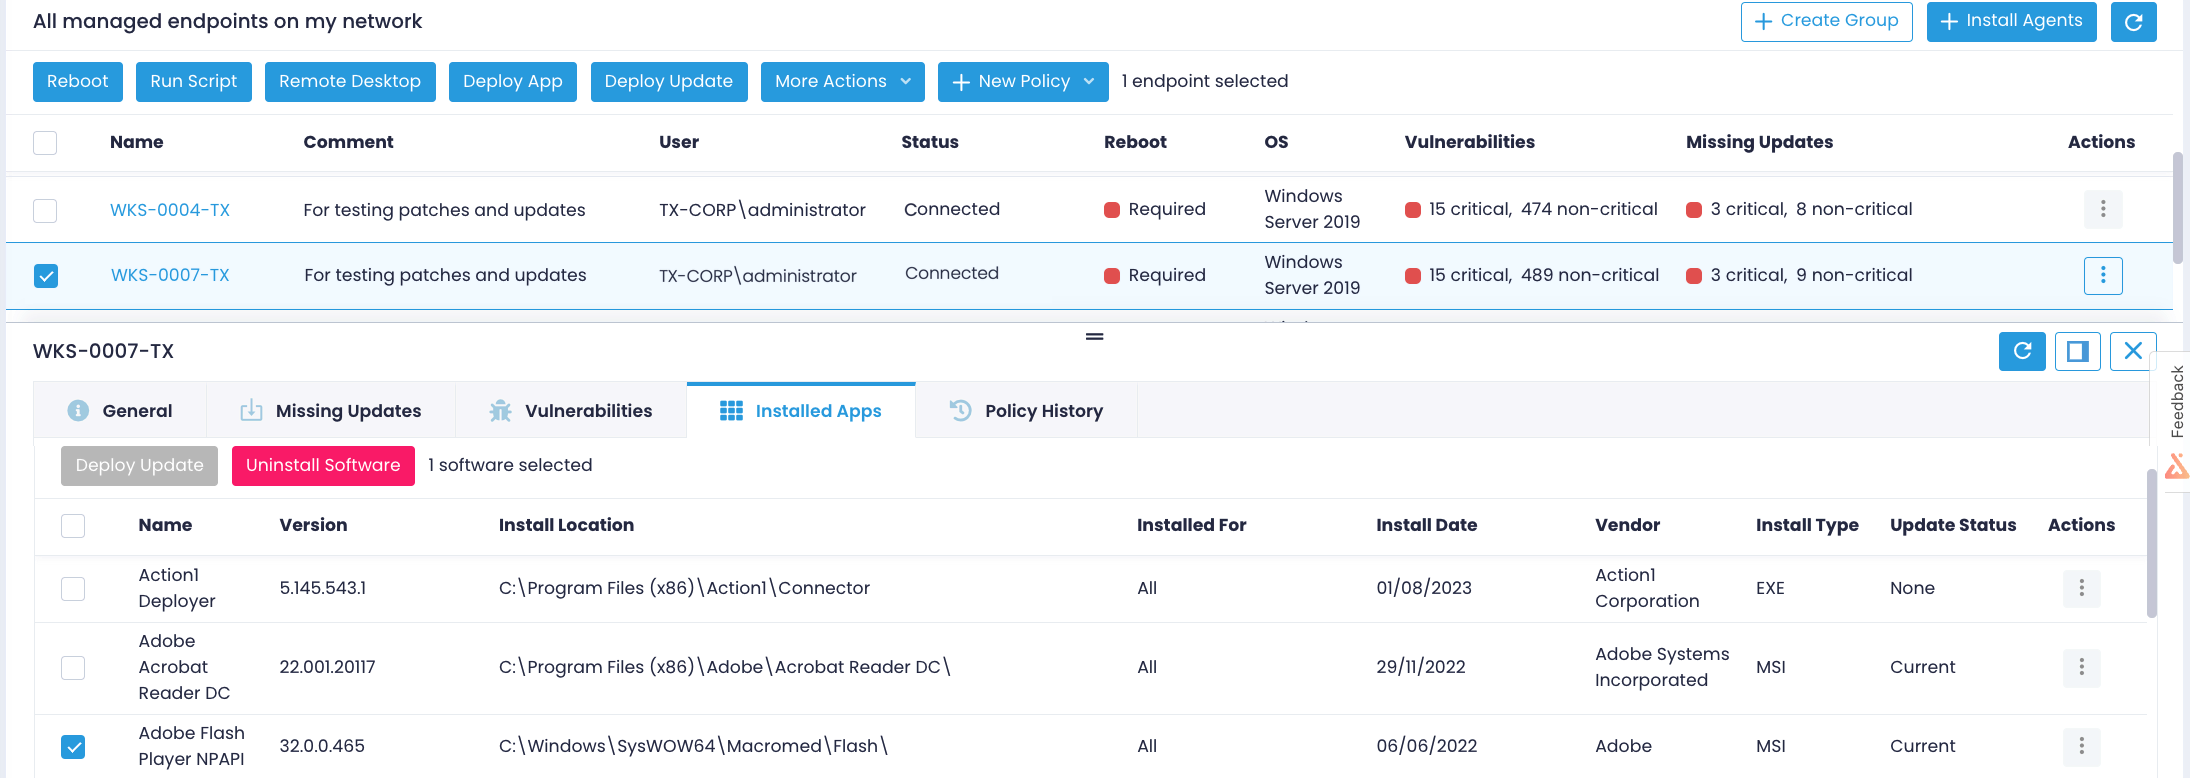 Managed endpoints dashboard with expanded Installed Apps tab